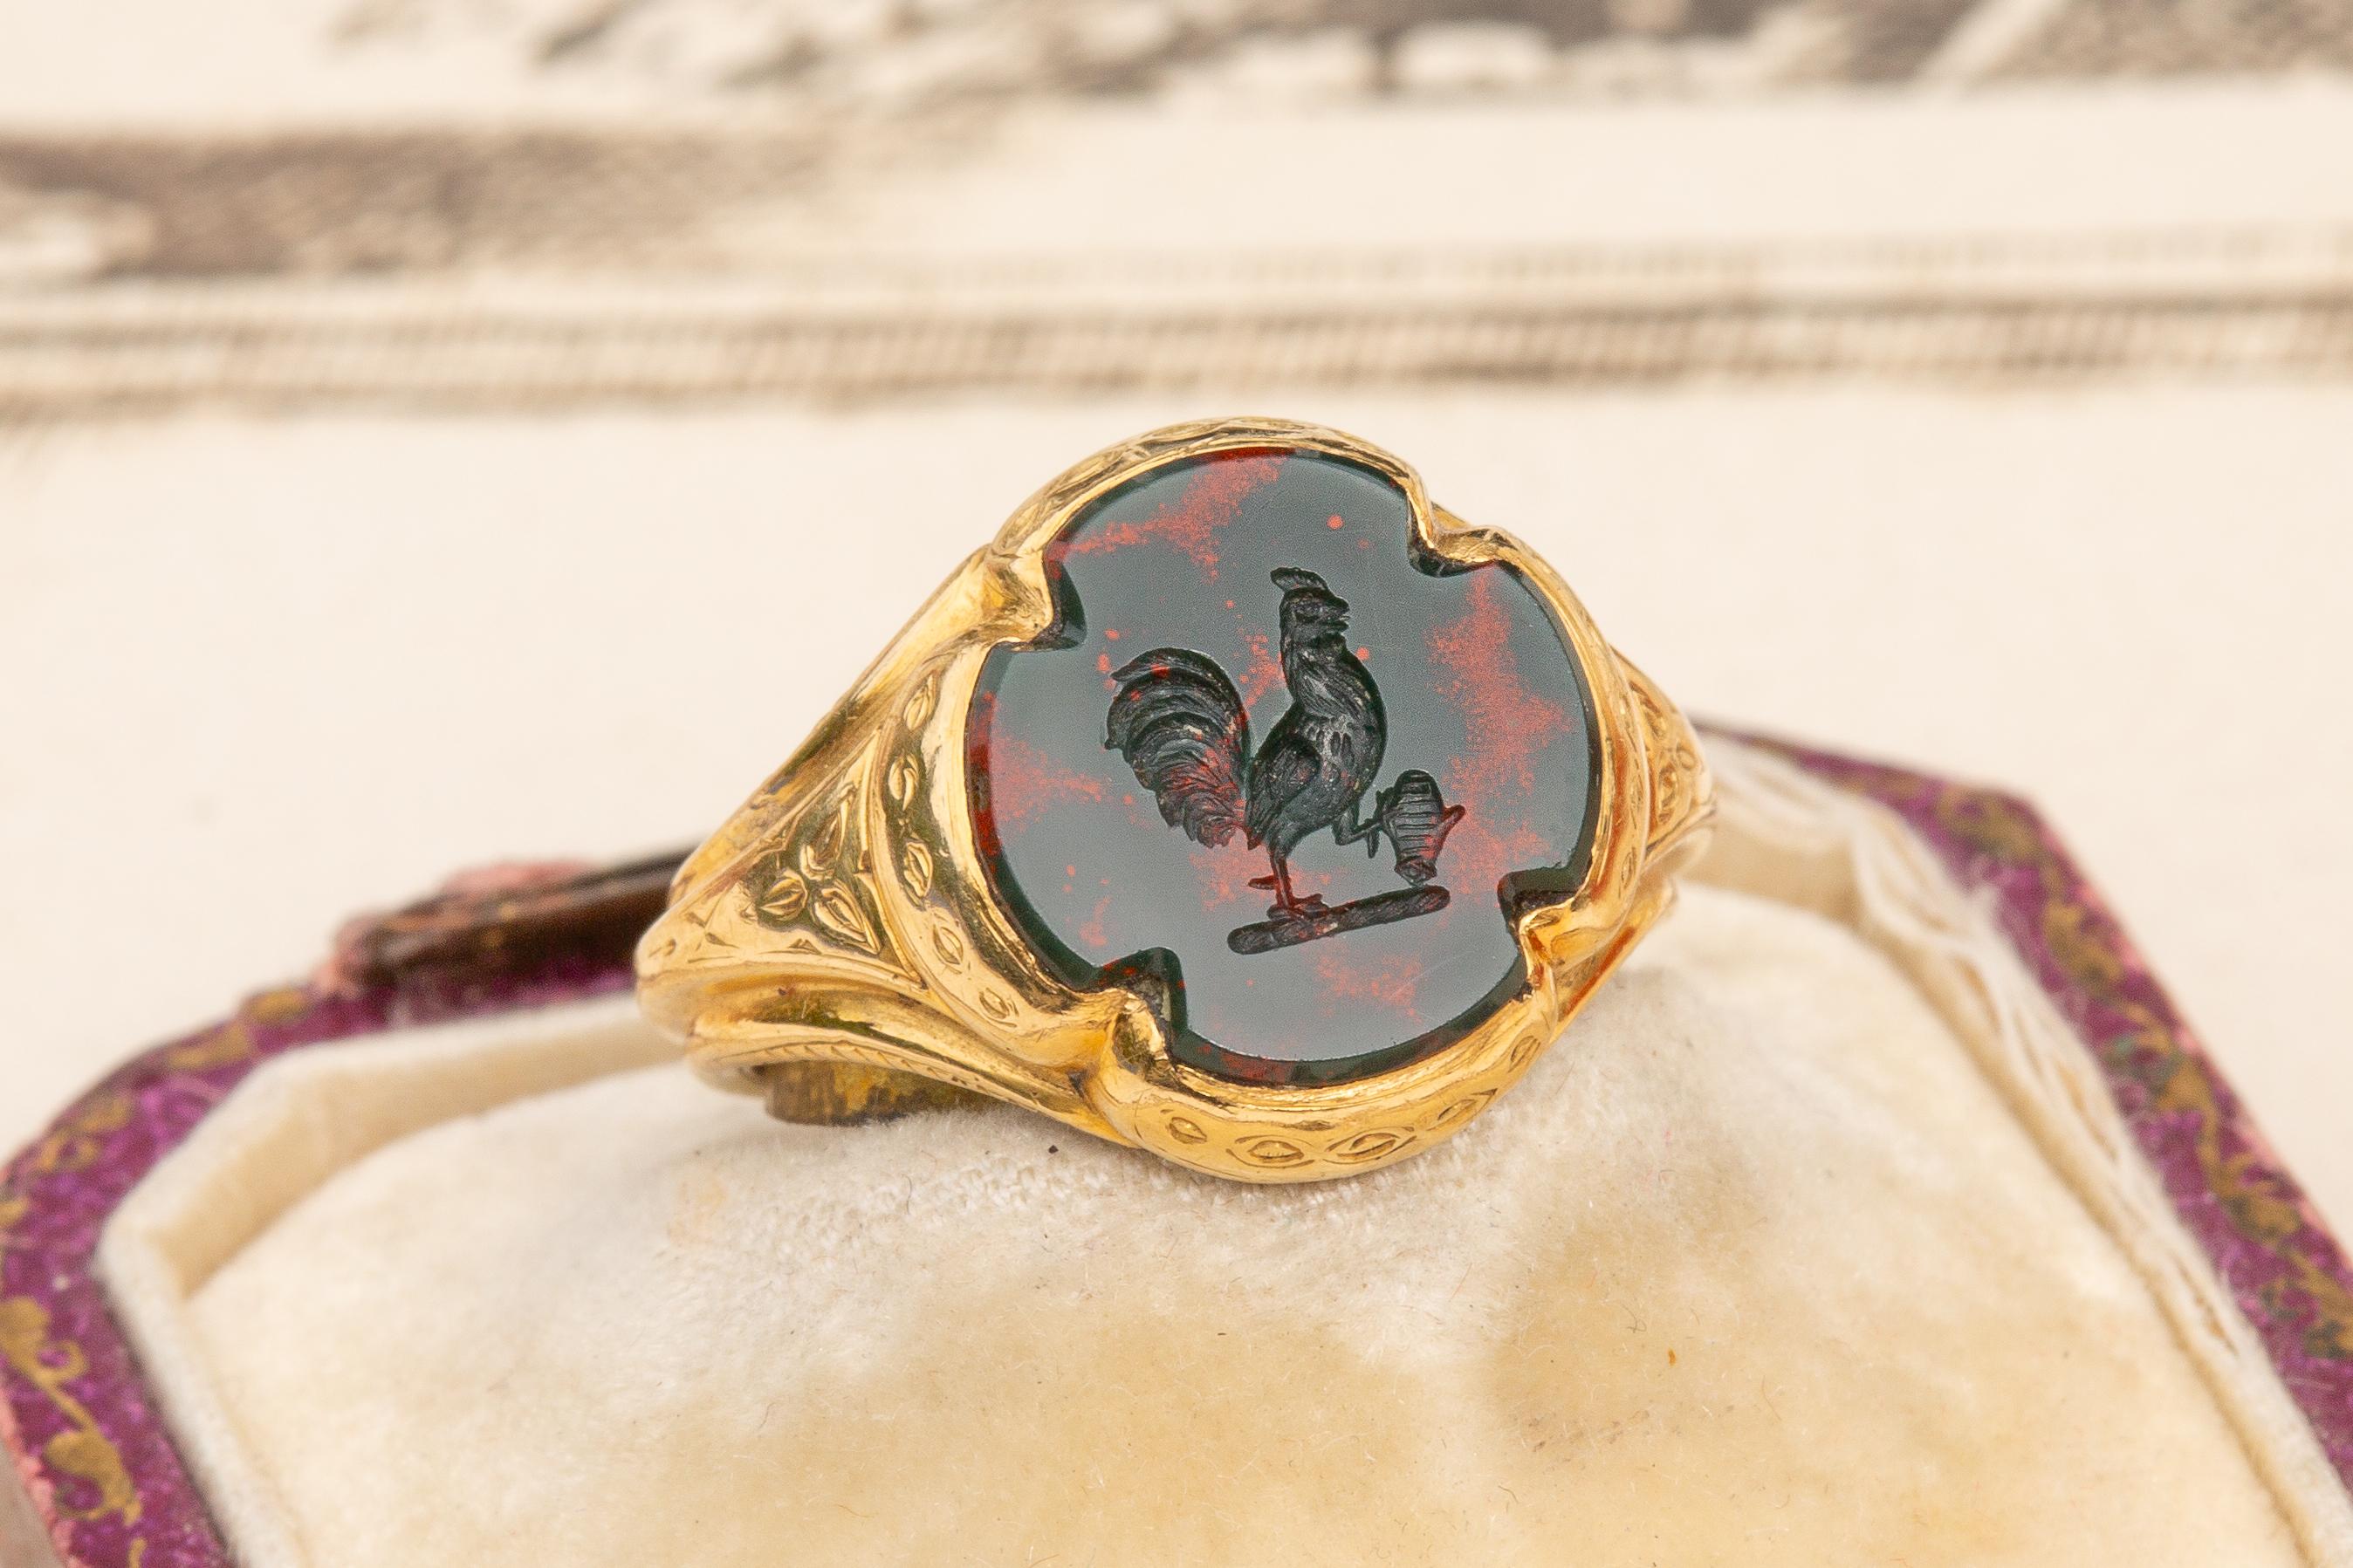 A superb antique signet seal ring dating to the second half of the 19th century, circa 1870. In the centre, a flat bloodstone of a cross shape has been intricately carved to depict an unusual coat of arms with a heraldic Gallic rooster or ‘coq